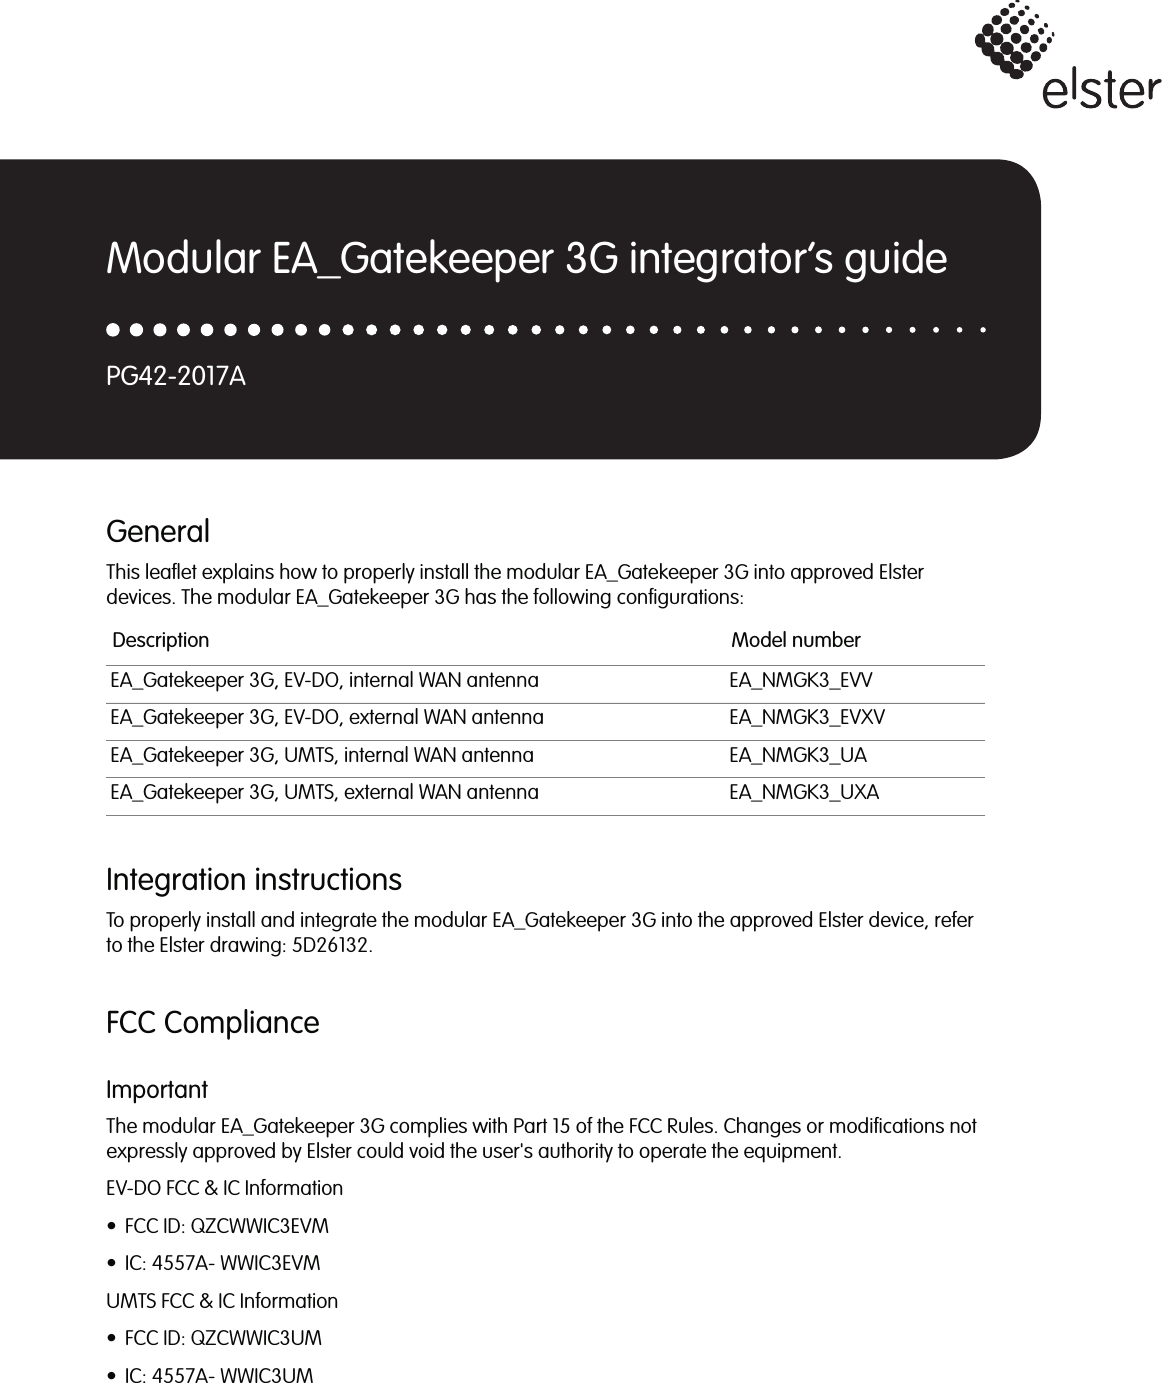 GeneralThis leaflet explains how to properly install the modular EA_Gatekeeper 3G into approved Elsterdevices. The modular EA_Gatekeeper 3G has the following configurations:Integration instructionsTo properly install and integrate the modular EA_Gatekeeper 3G into the approved Elster device, referto the Elster drawing: 5D26132.FCC ComplianceImportantThe modular EA_Gatekeeper 3G complies with Part 15 of the FCC Rules. Changes or modifications notexpressly approved by Elster could void the user&apos;s authority to operate the equipment.EV-DO FCC &amp; IC Information• FCC ID: QZCWWIC3EVM• IC: 4557A- WWIC3EVMUMTS FCC &amp; IC Information• FCC ID: QZCWWIC3UM• IC: 4557A- WWIC3UMDescription Model numberEA_Gatekeeper 3G, EV-DO, internal WAN antenna EA_NMGK3_EVVEA_Gatekeeper 3G, EV-DO, external WAN antenna EA_NMGK3_EVXVEA_Gatekeeper 3G, UMTS, internal WAN antenna EA_NMGK3_UAEA_Gatekeeper 3G, UMTS, external WAN antenna EA_NMGK3_UXAModular EA_Gatekeeper 3G integrator’s guidePG42-2017A